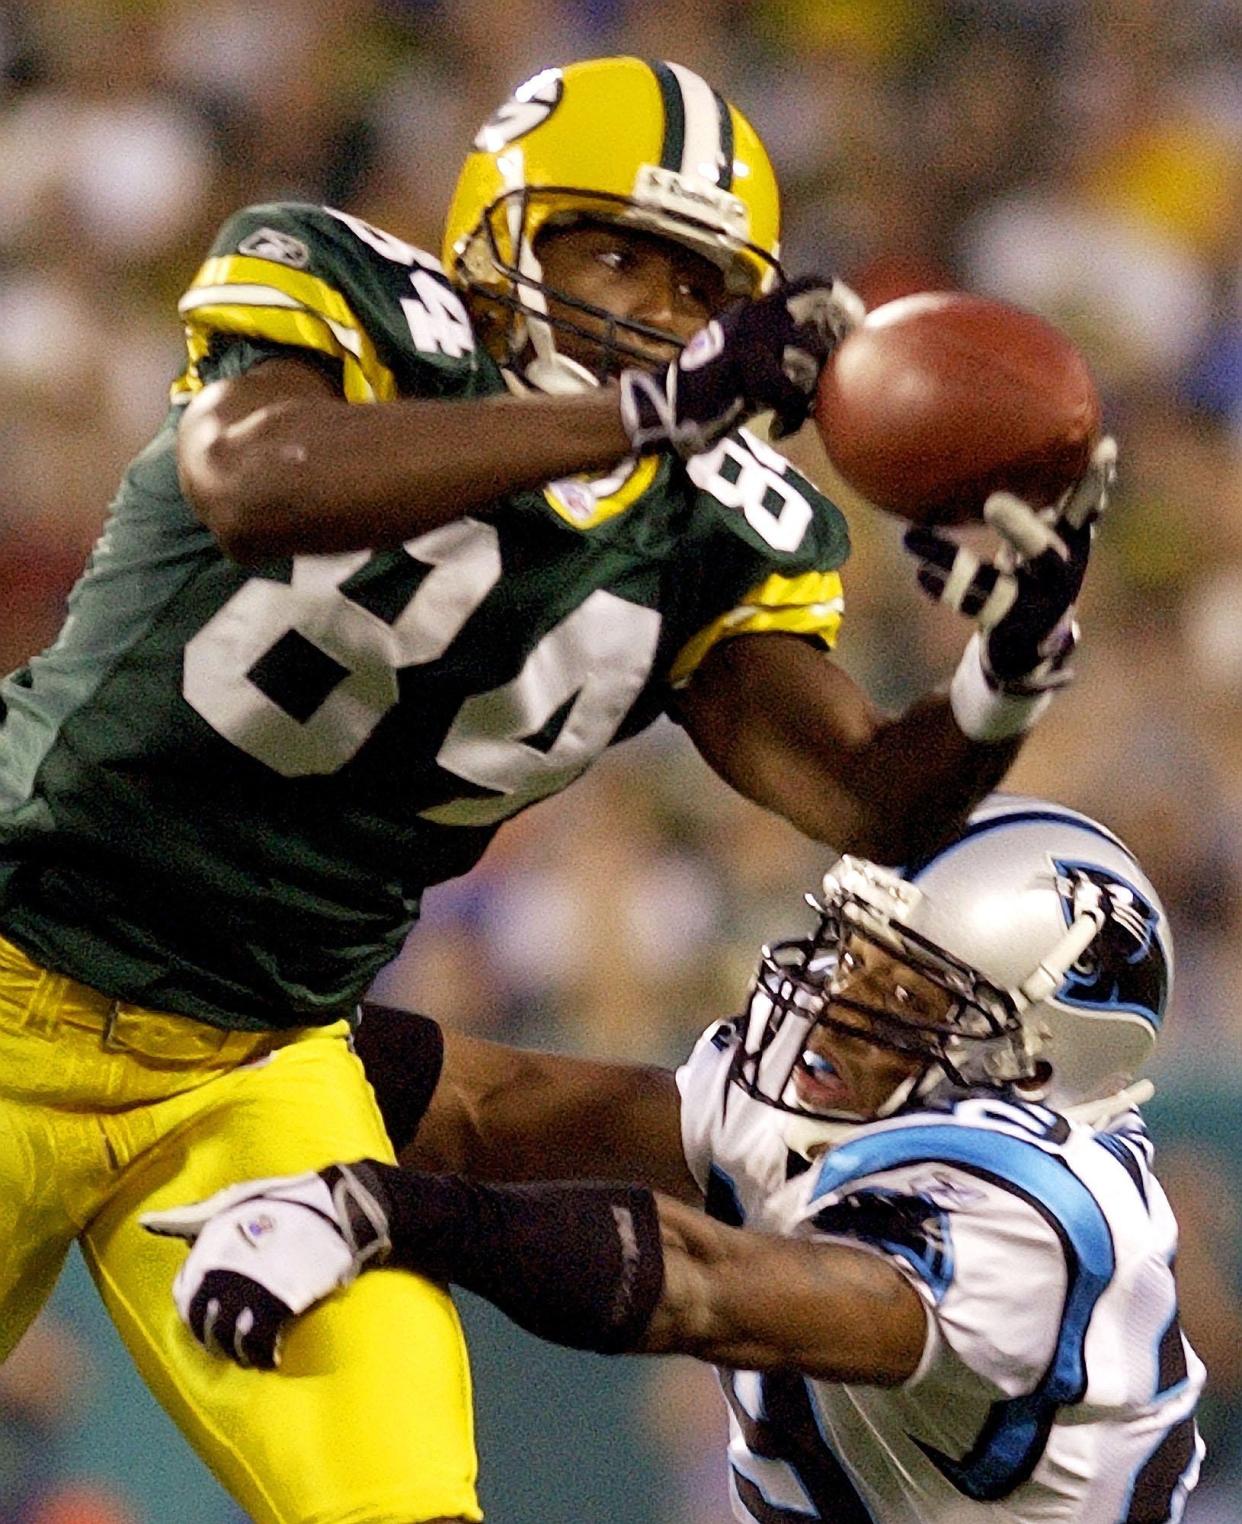 Green Bay Packers receiver Javon Walker catches a pass in front of Carolina Panthers cornerback Dante Wesley.